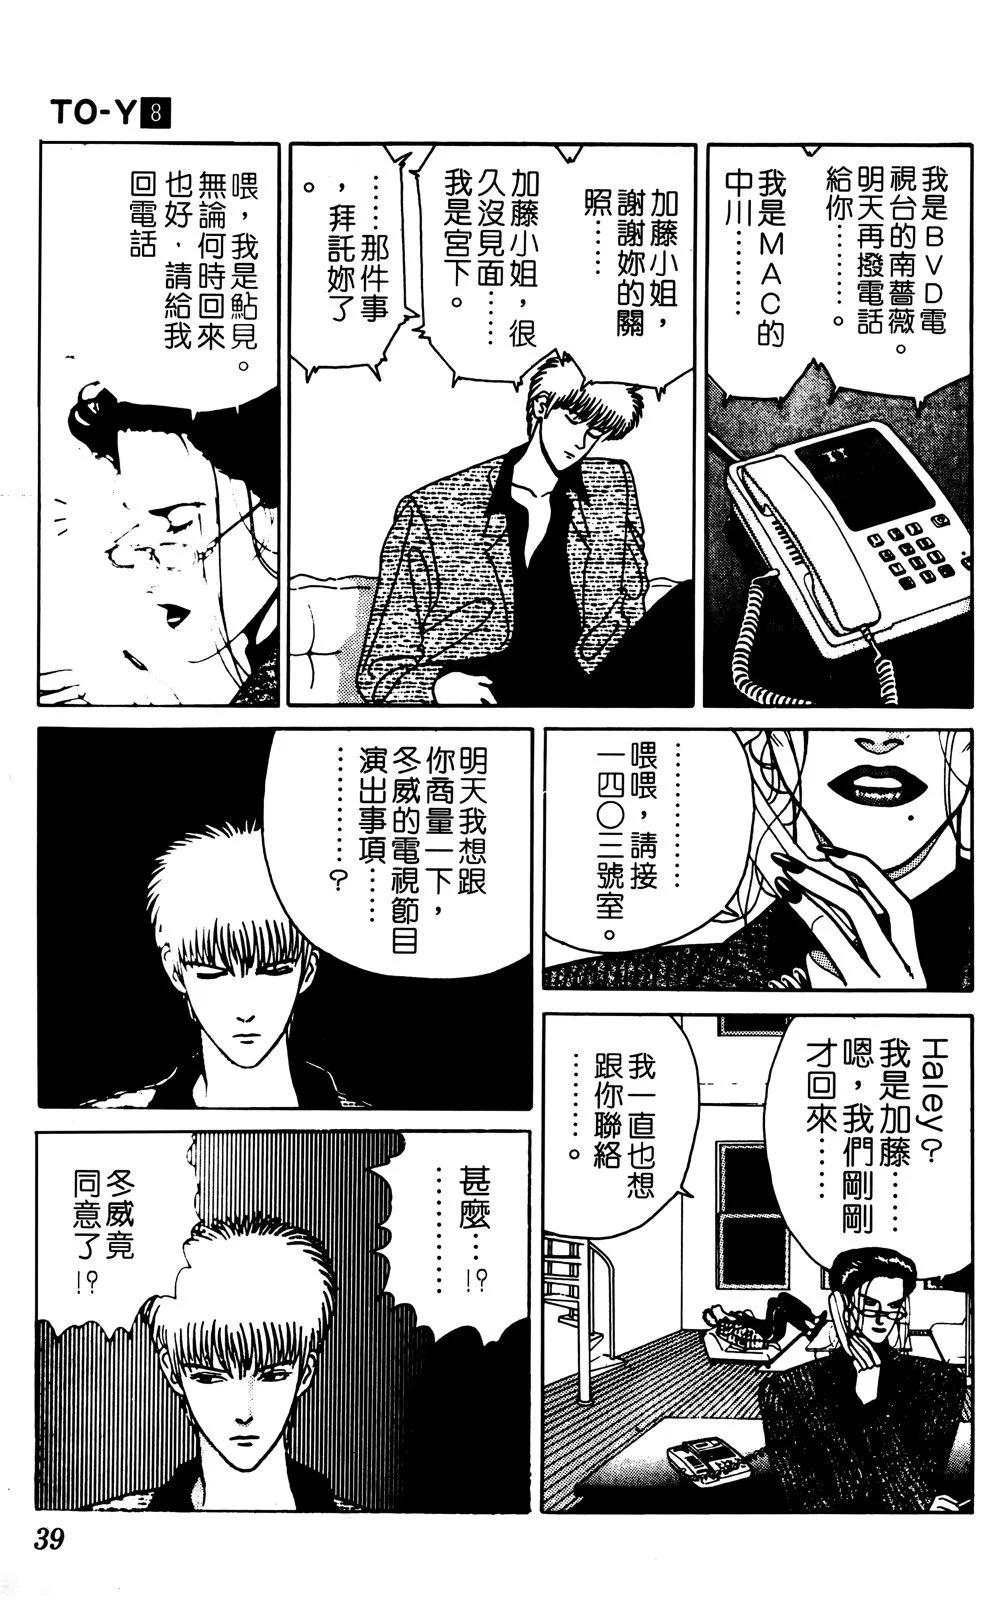 TO-Y - 第08卷(1/4) - 2